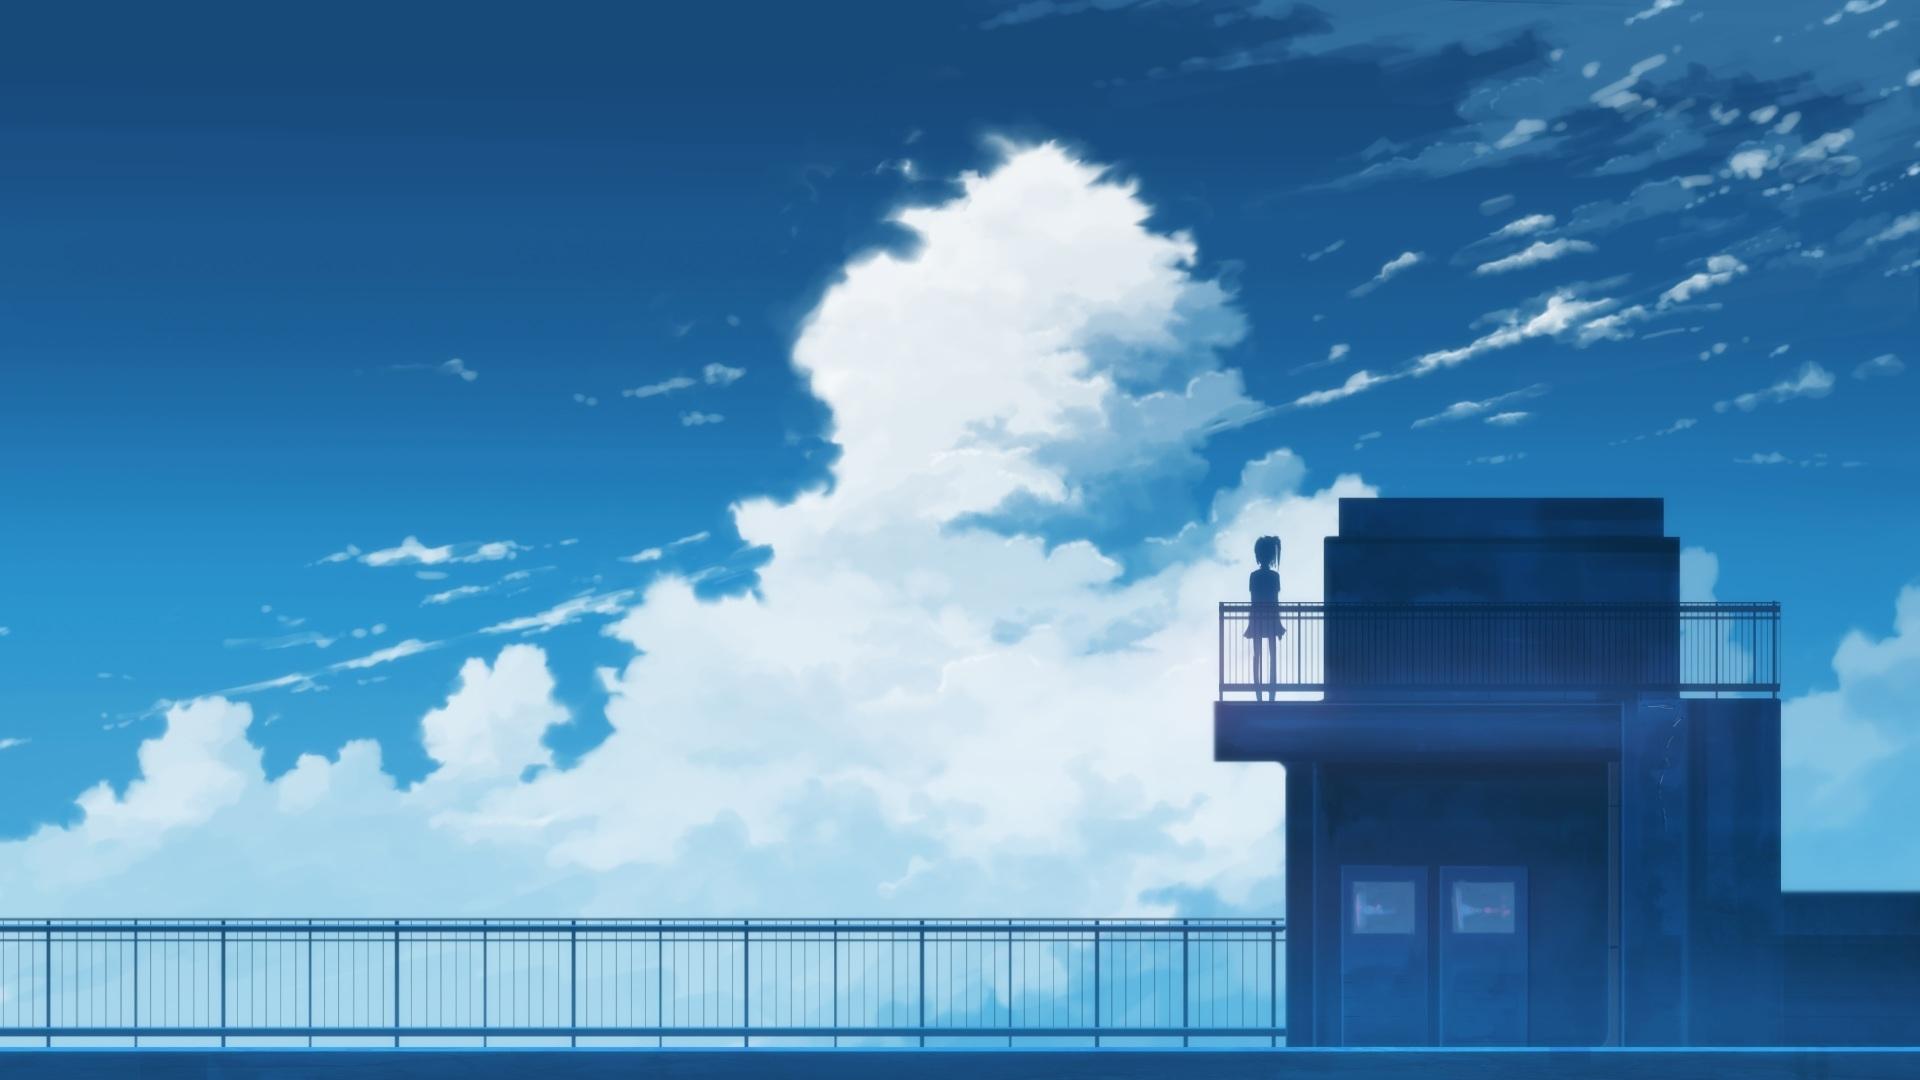 Download 1920x1080 Anime Girl, Rooftop, Clouds, Scenic, Sky